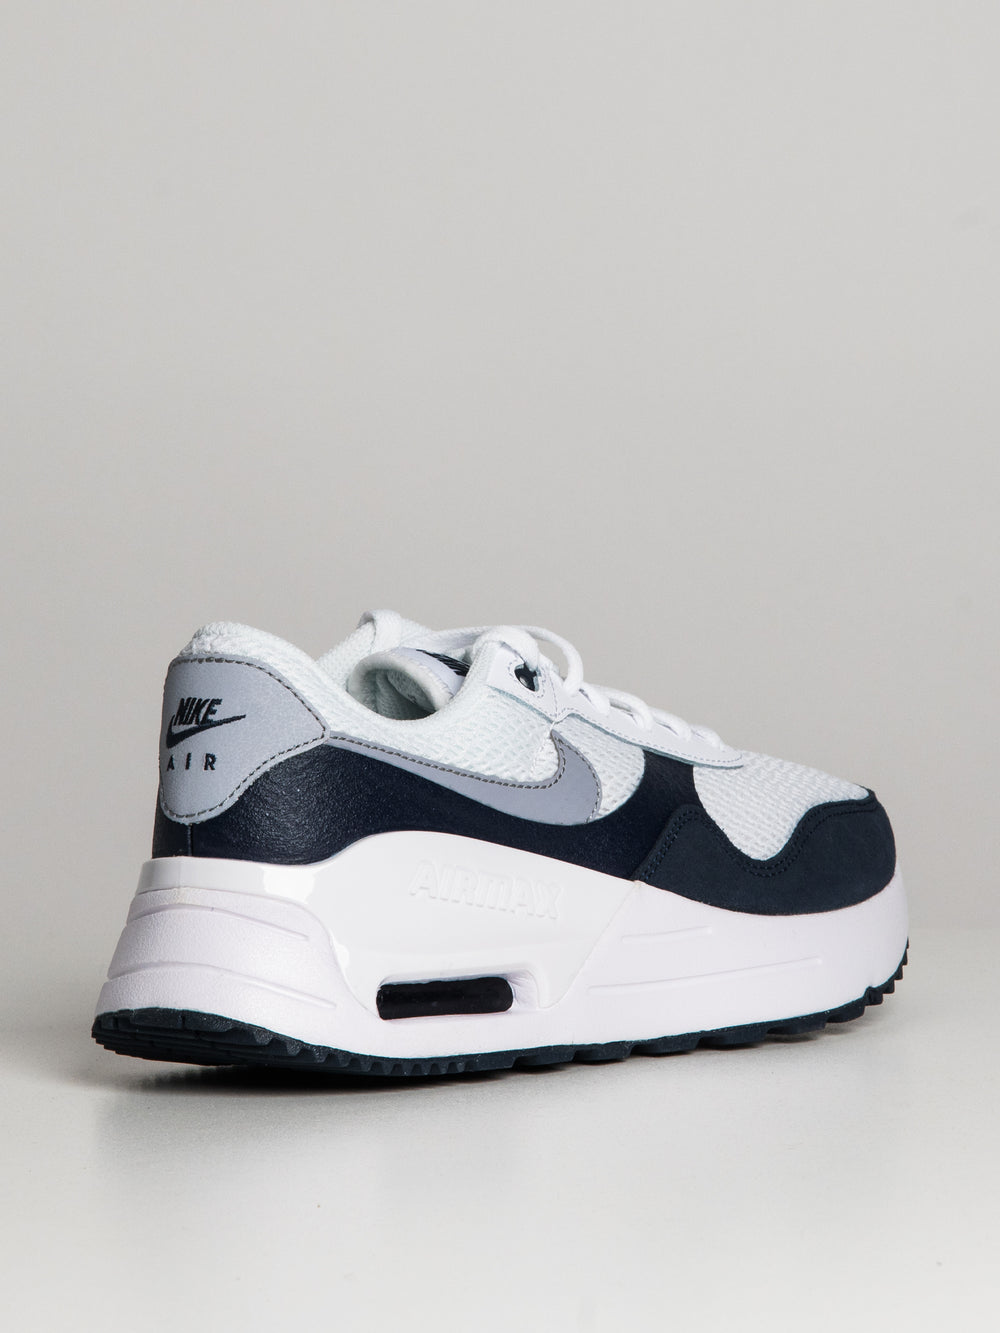 MENS NIKE NK AIR MAX SYSTEM - CLEARANCE